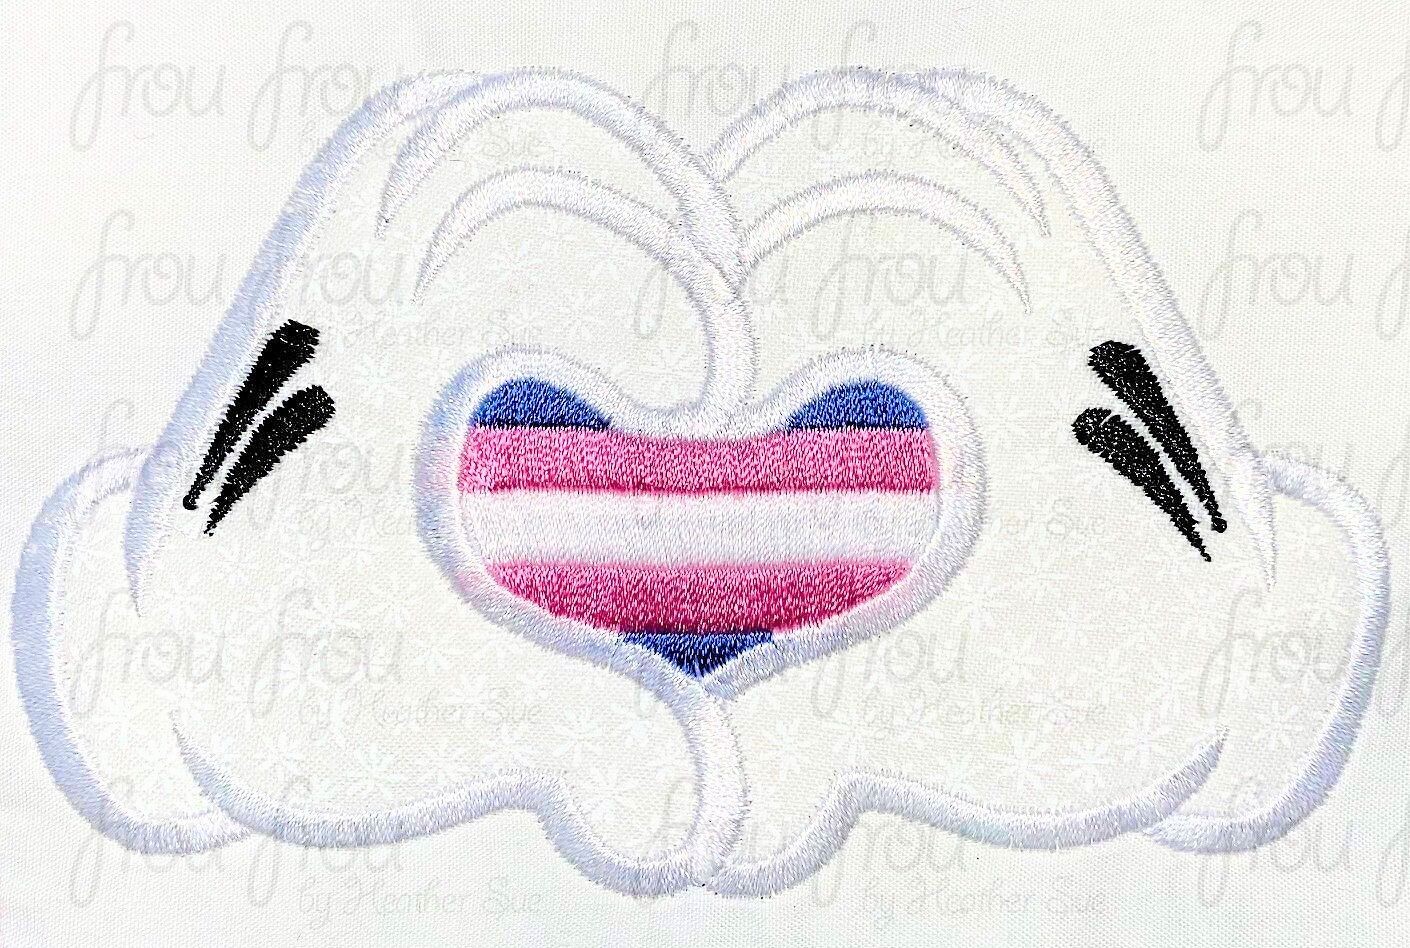 Pride Rainbow Transgender Mister Miss Mouse Hands Five Stripes Machine Applique and Filled Embroidery Design 1.5